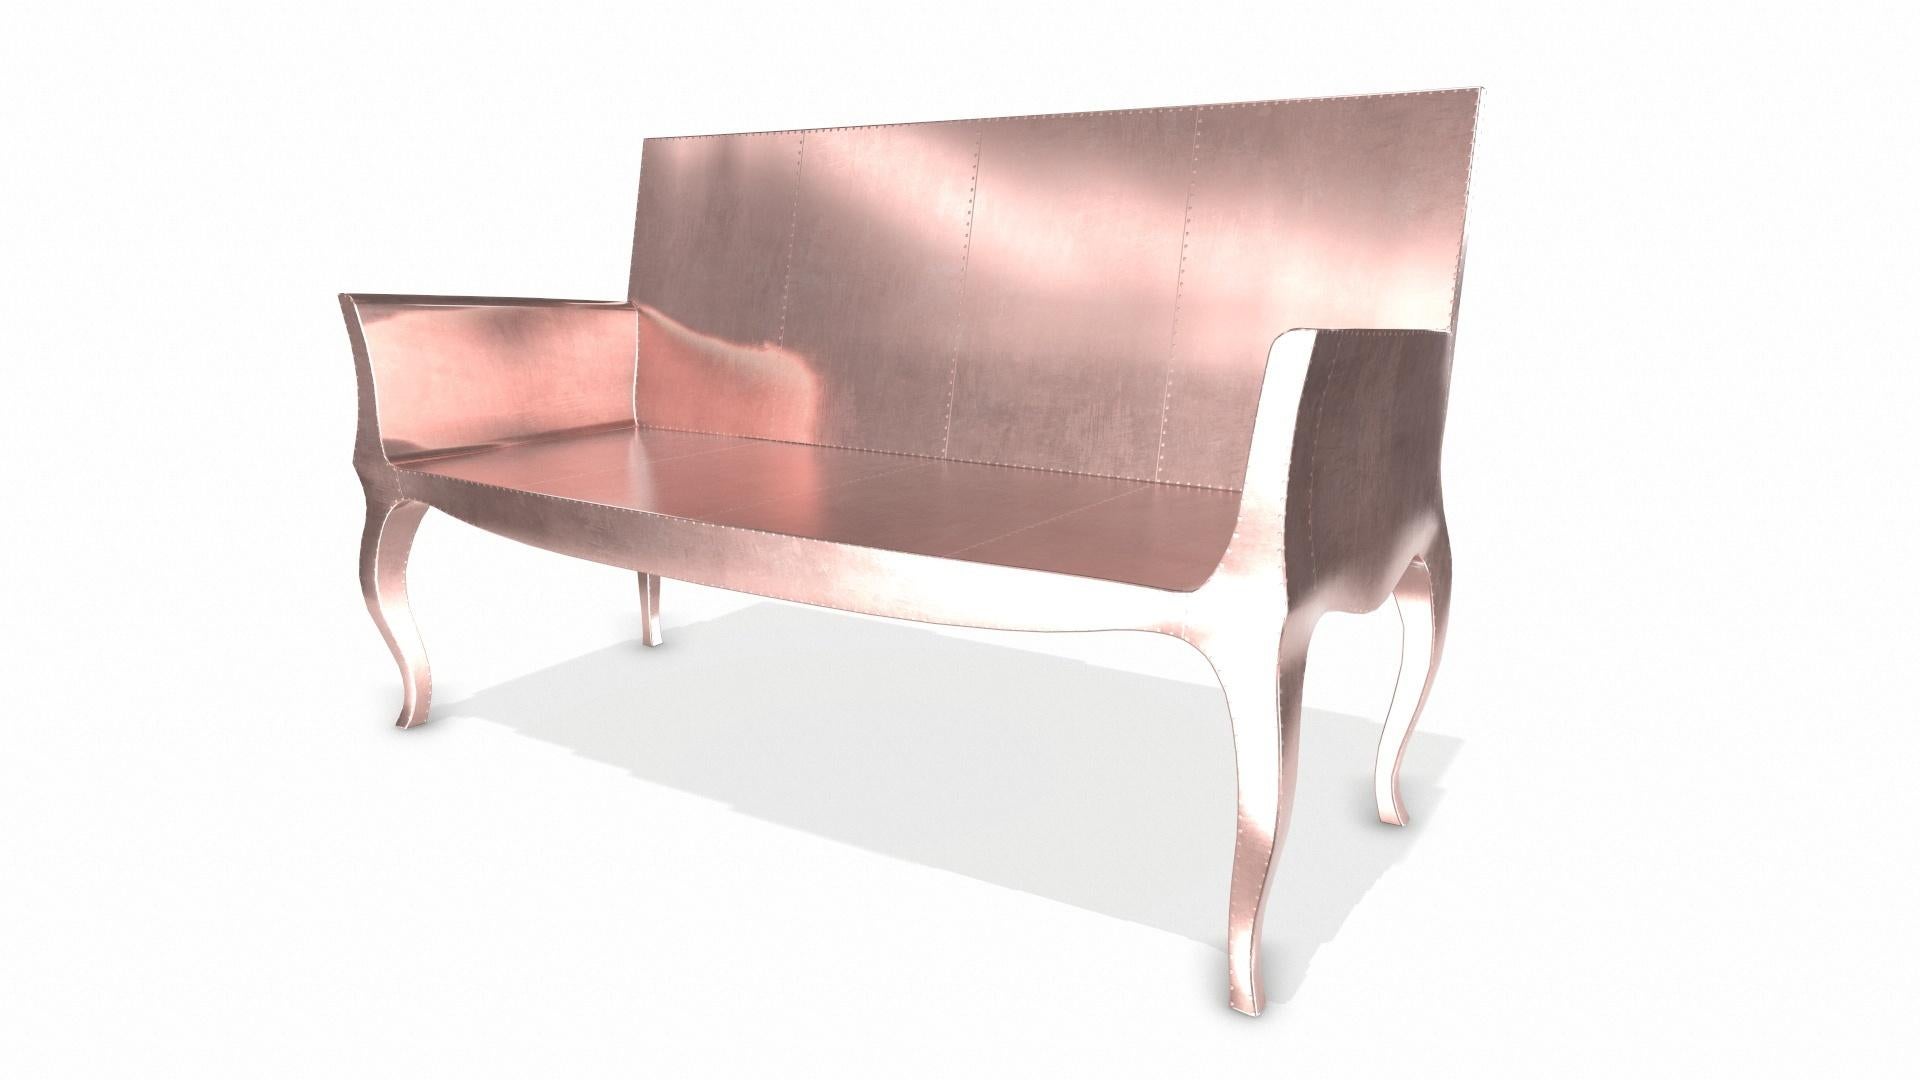 American Louise Settee Art Deco Living Room Sets in Smooth Copper by Paul Mathieu  For Sale